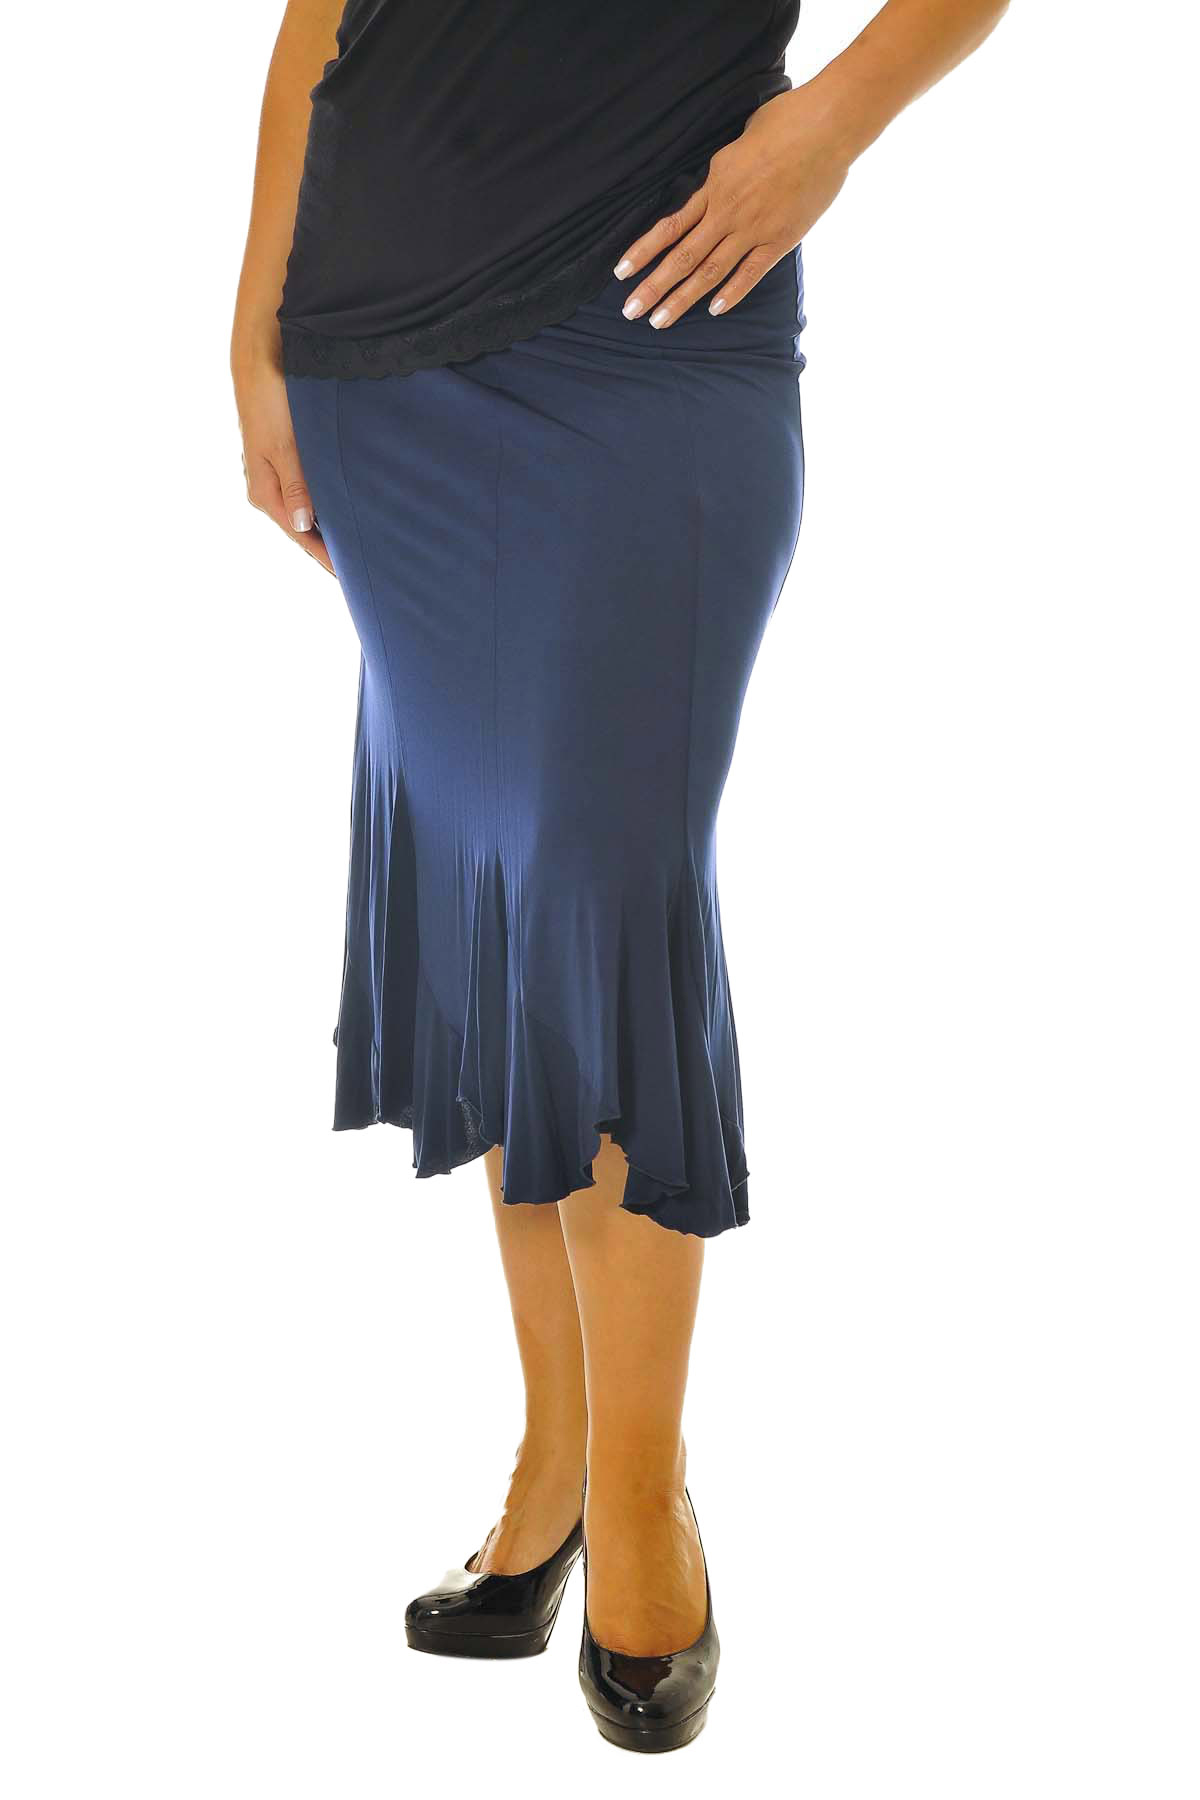 New Ladies Skirt Plus Size Womens Ity Mid Length Flared Formal Nouvelle